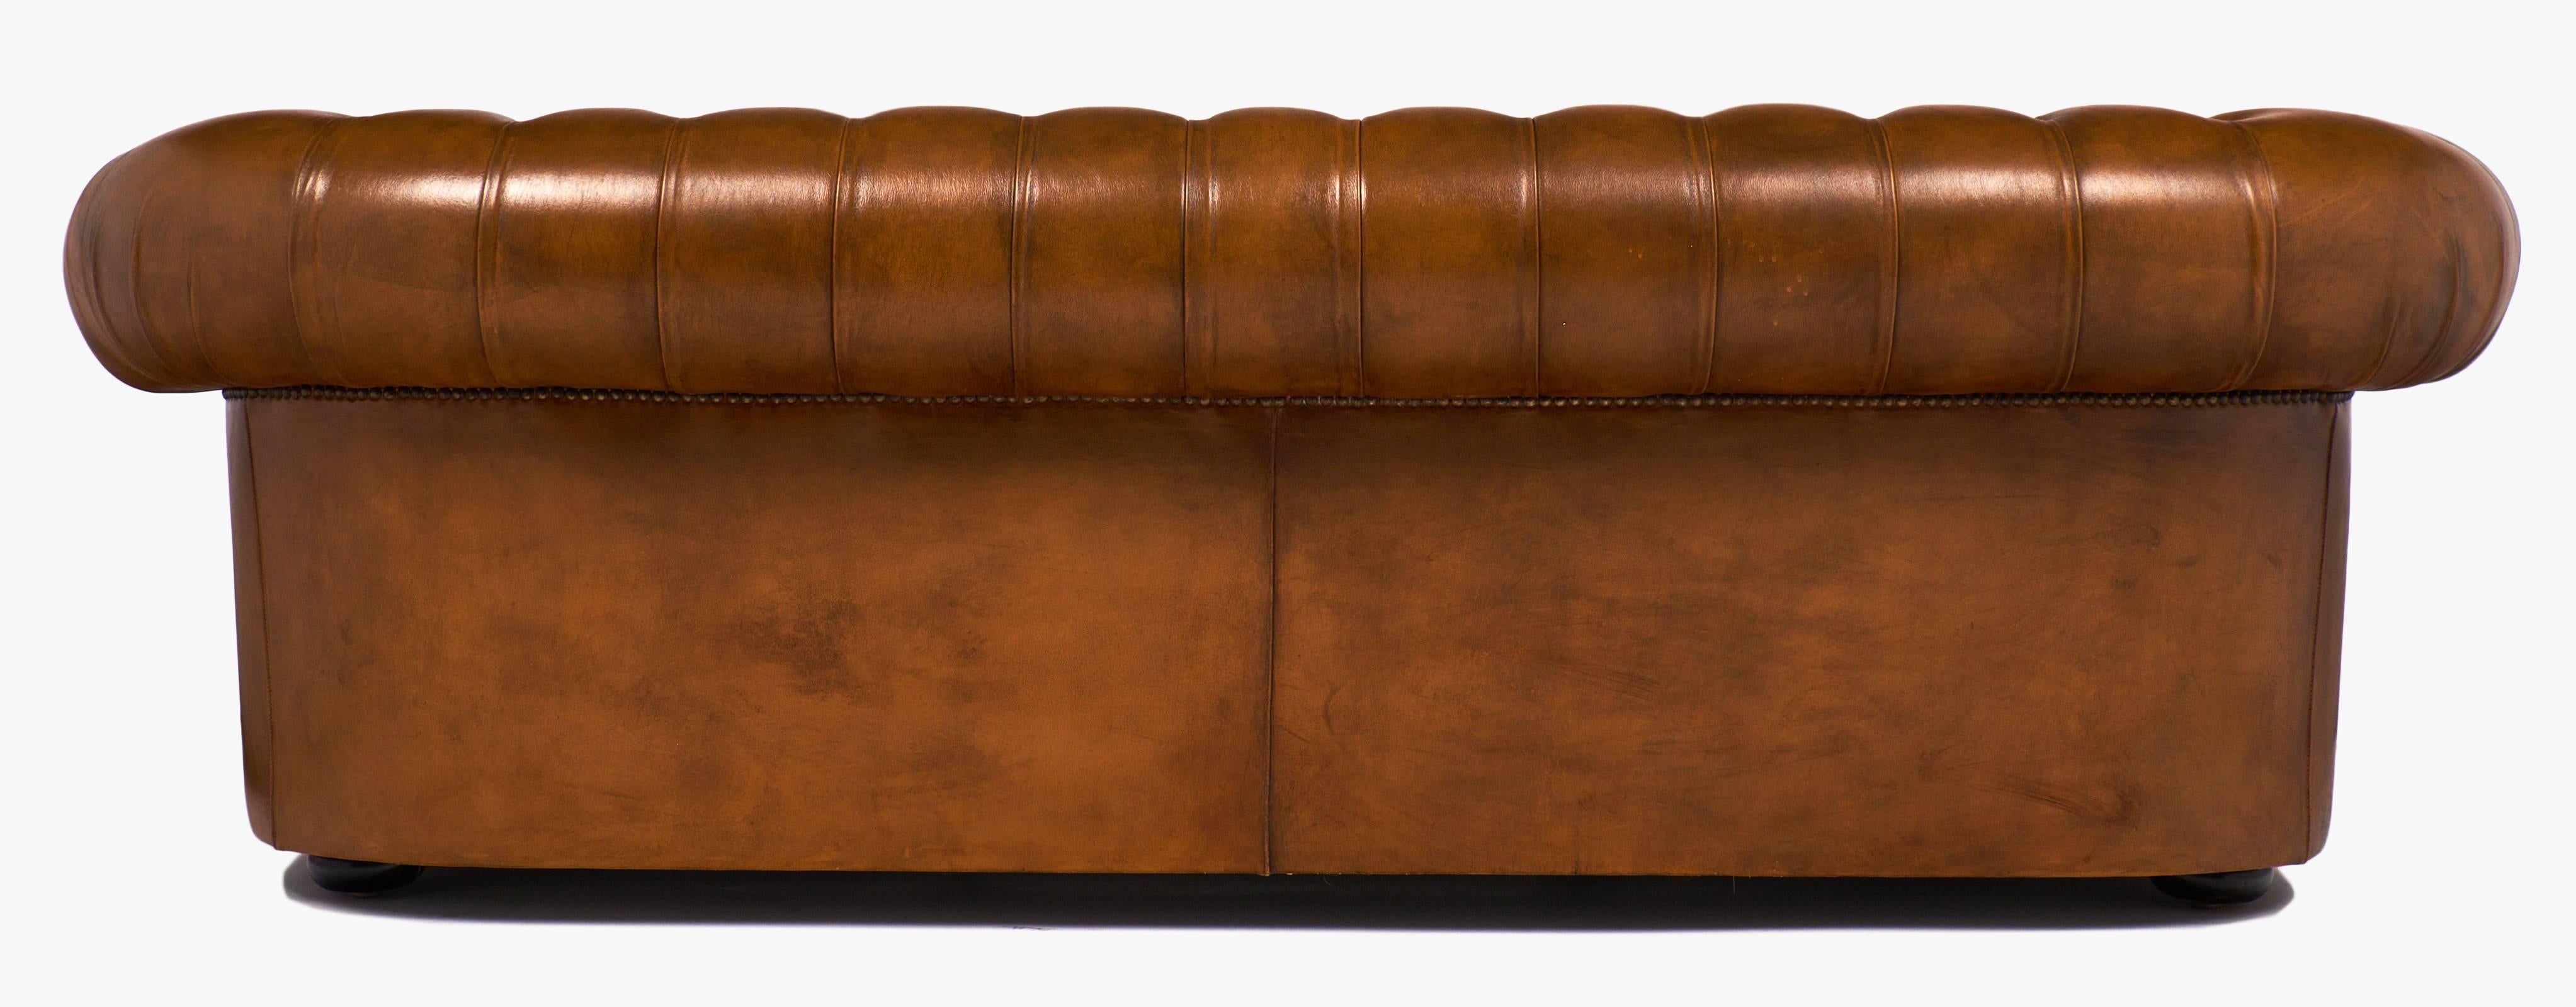 Mid-20th Century Vintage English Cognac Leather Chesterfield Sofa